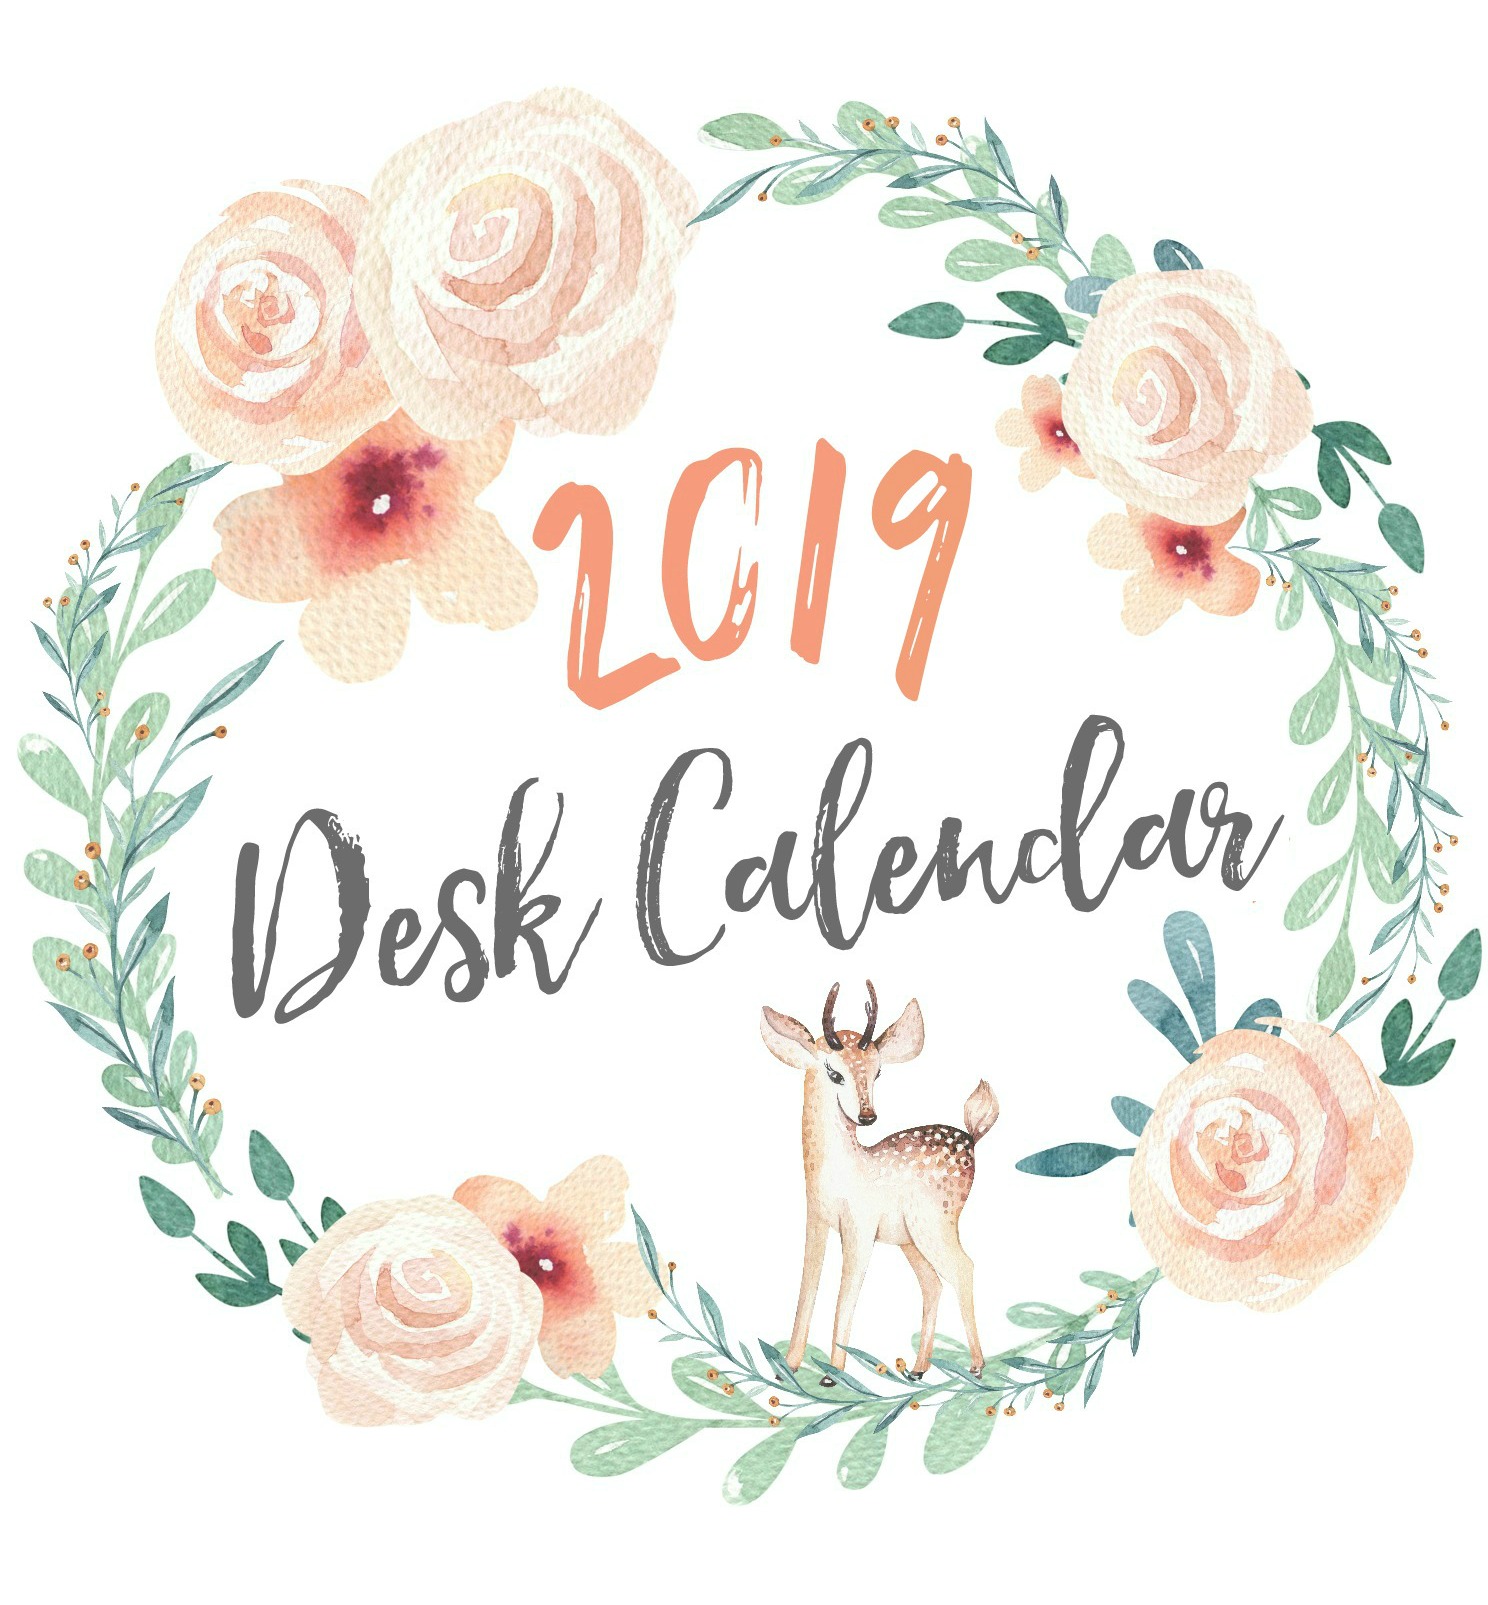 Watercolor 2019 desk calendar available to download and print.